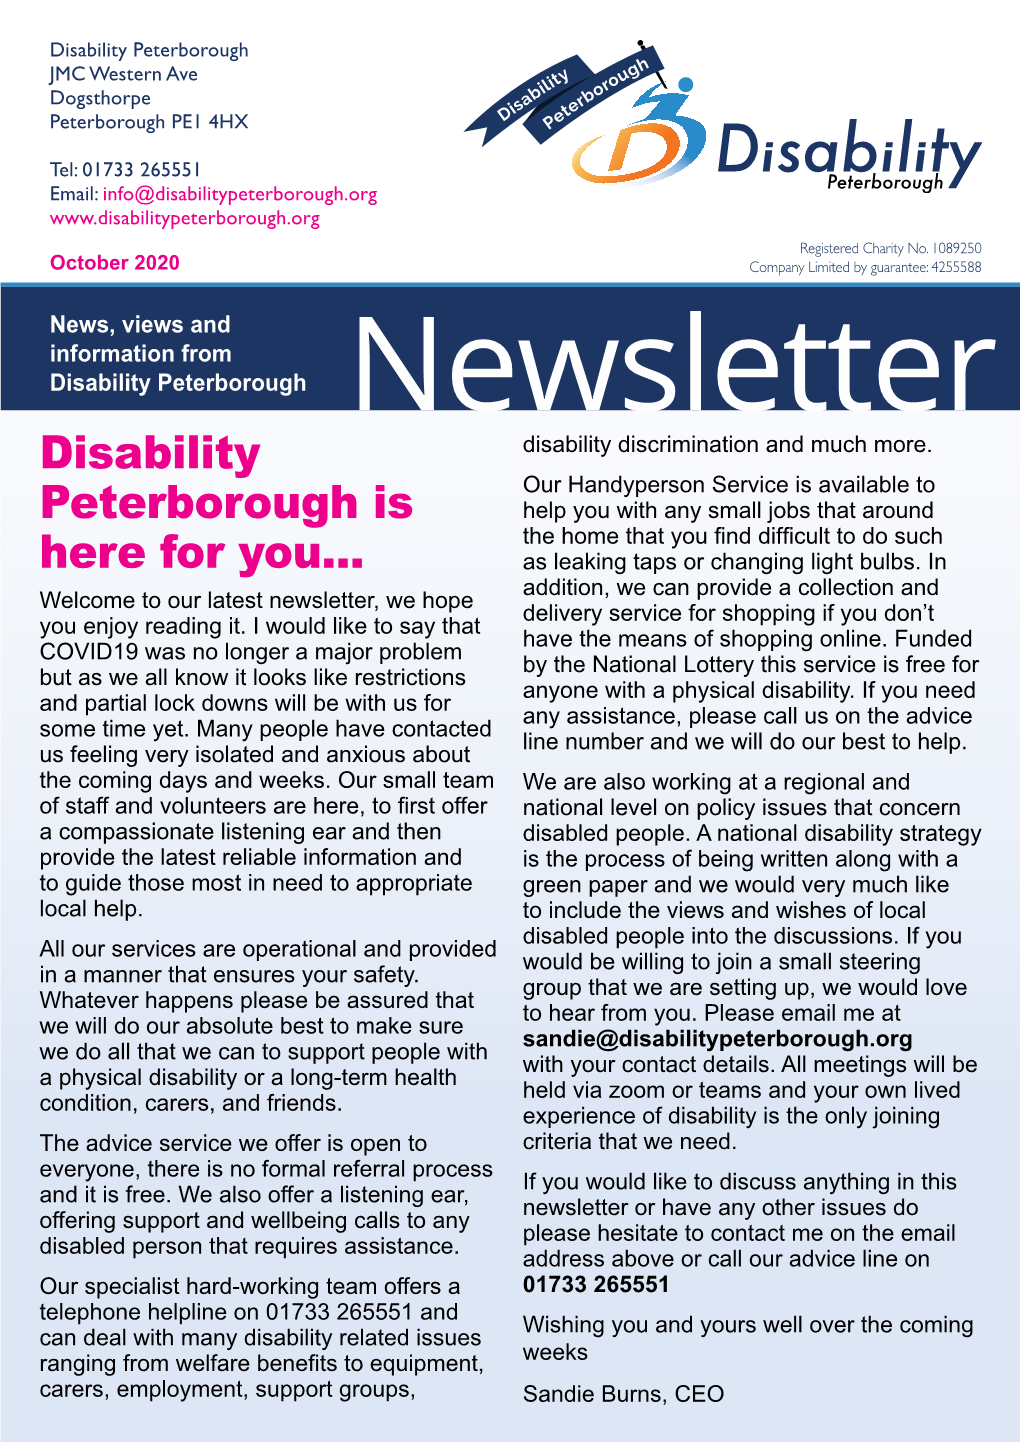 Disability Peterborough Is Here for You